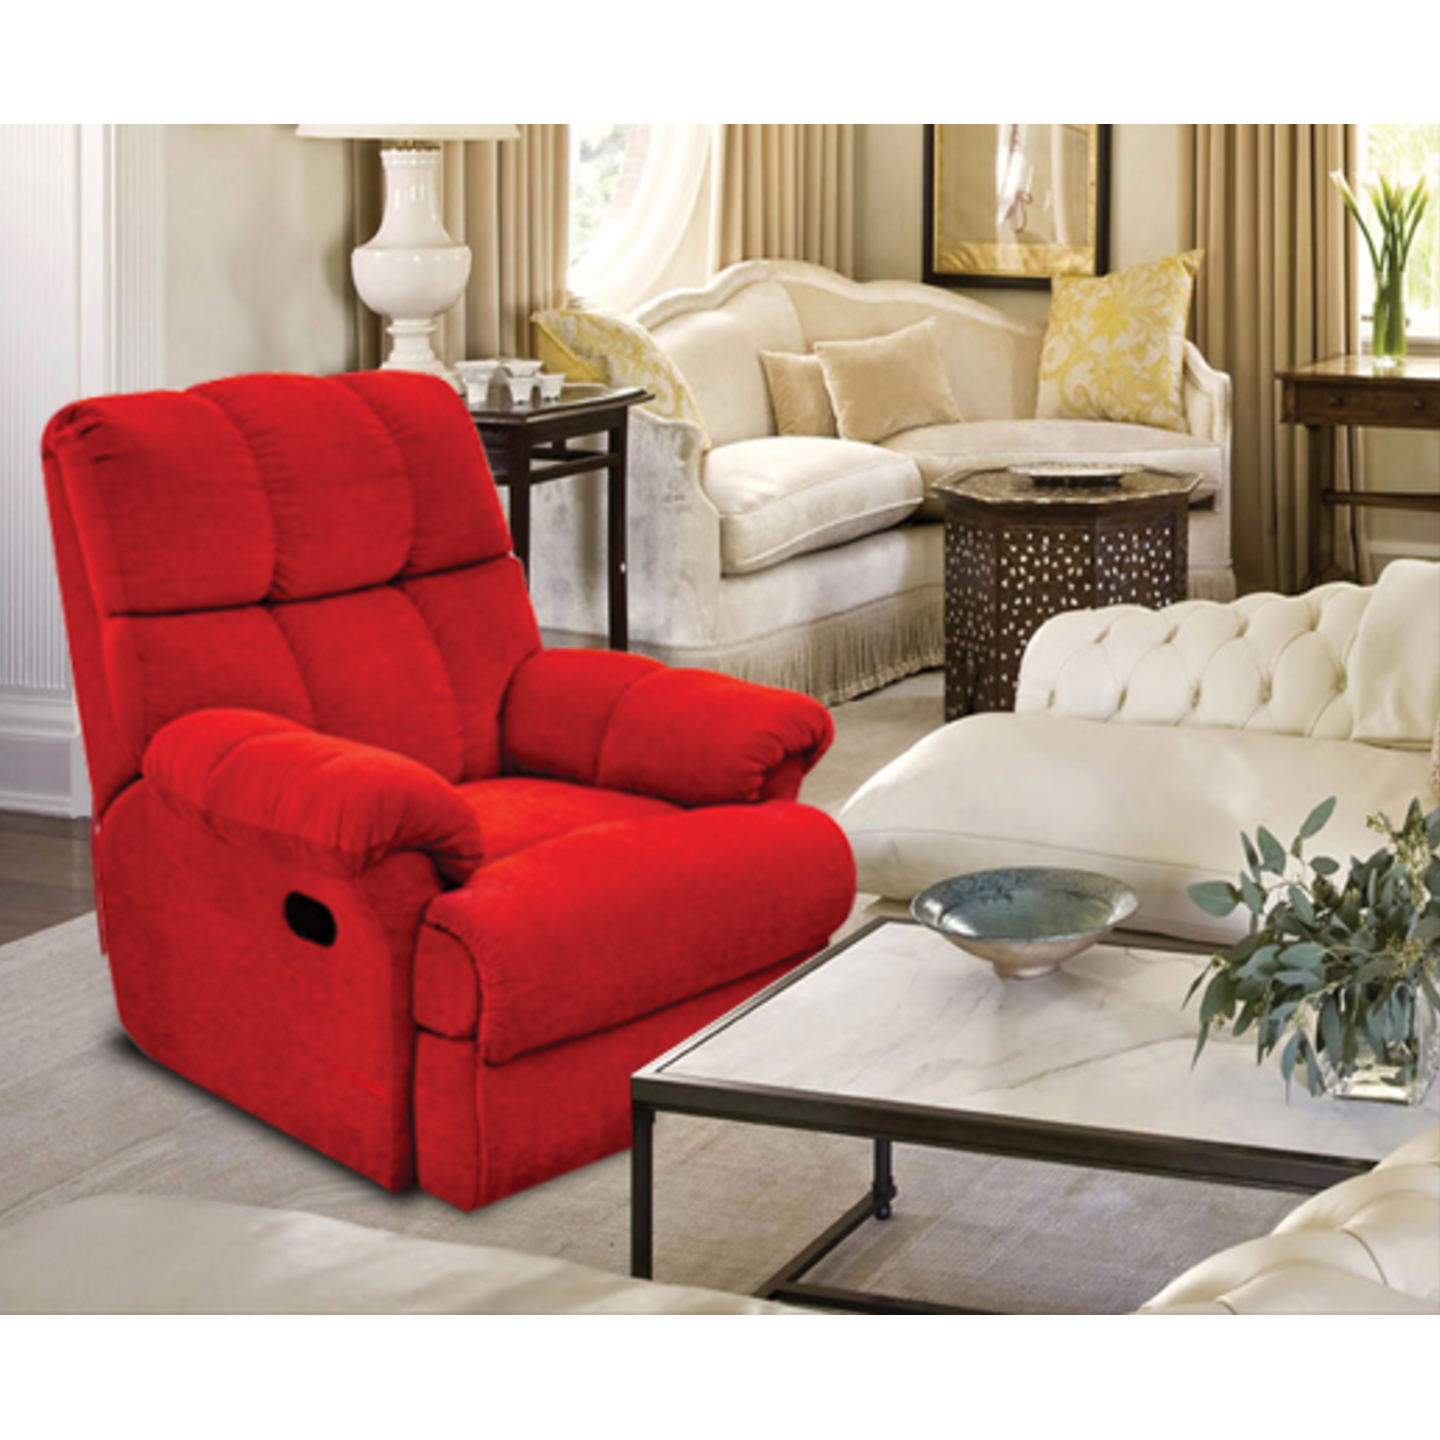 LN Recliner Chair Casa Electronic system In Red Colour